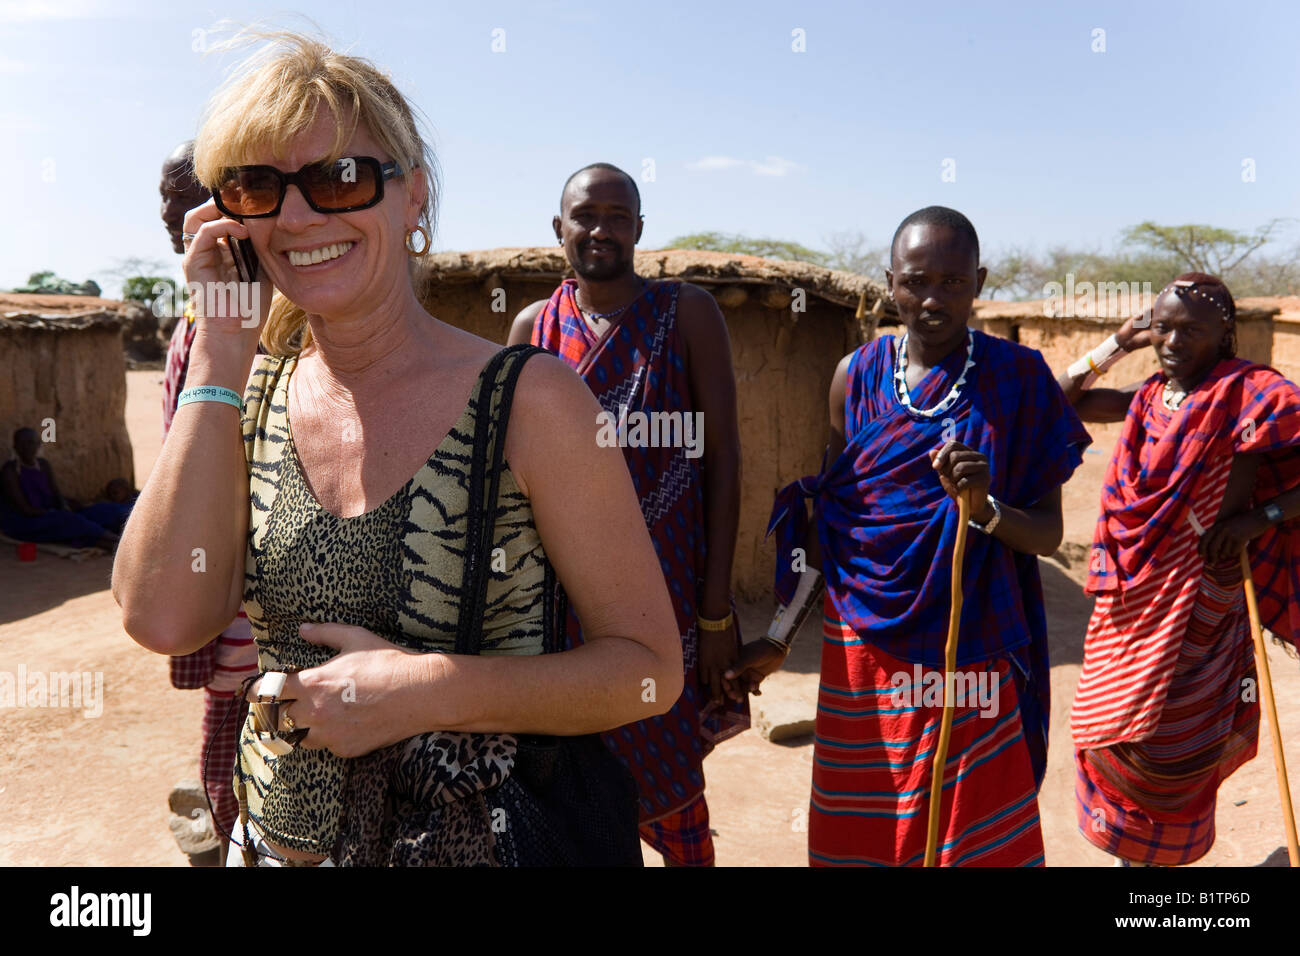 Female tourist phoning with a mobile phone in a Massai Village Coast Kenya Stock Photo